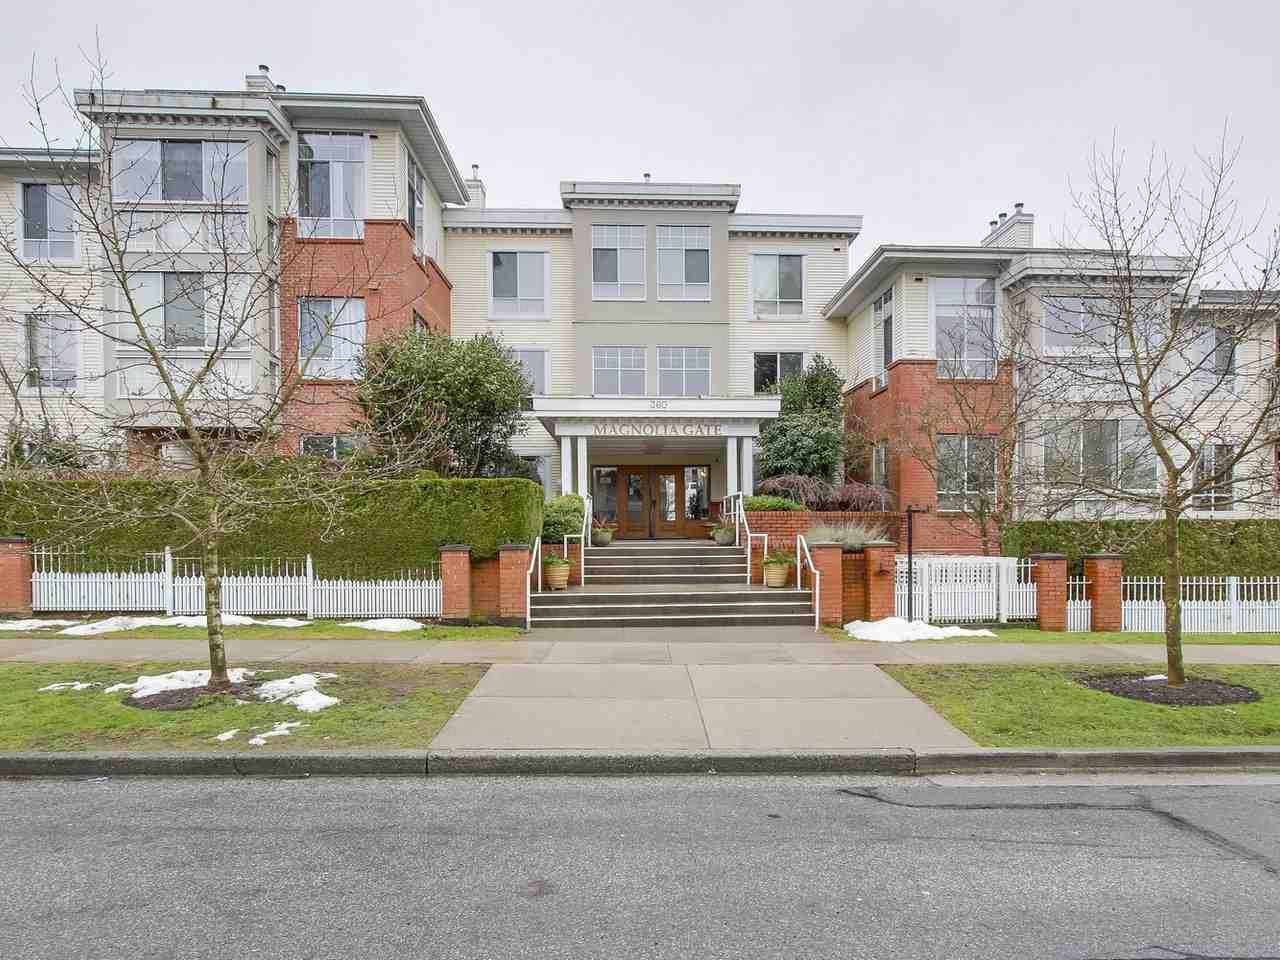 I have sold a property at 405 360 36TH AVE E in Vancouver
